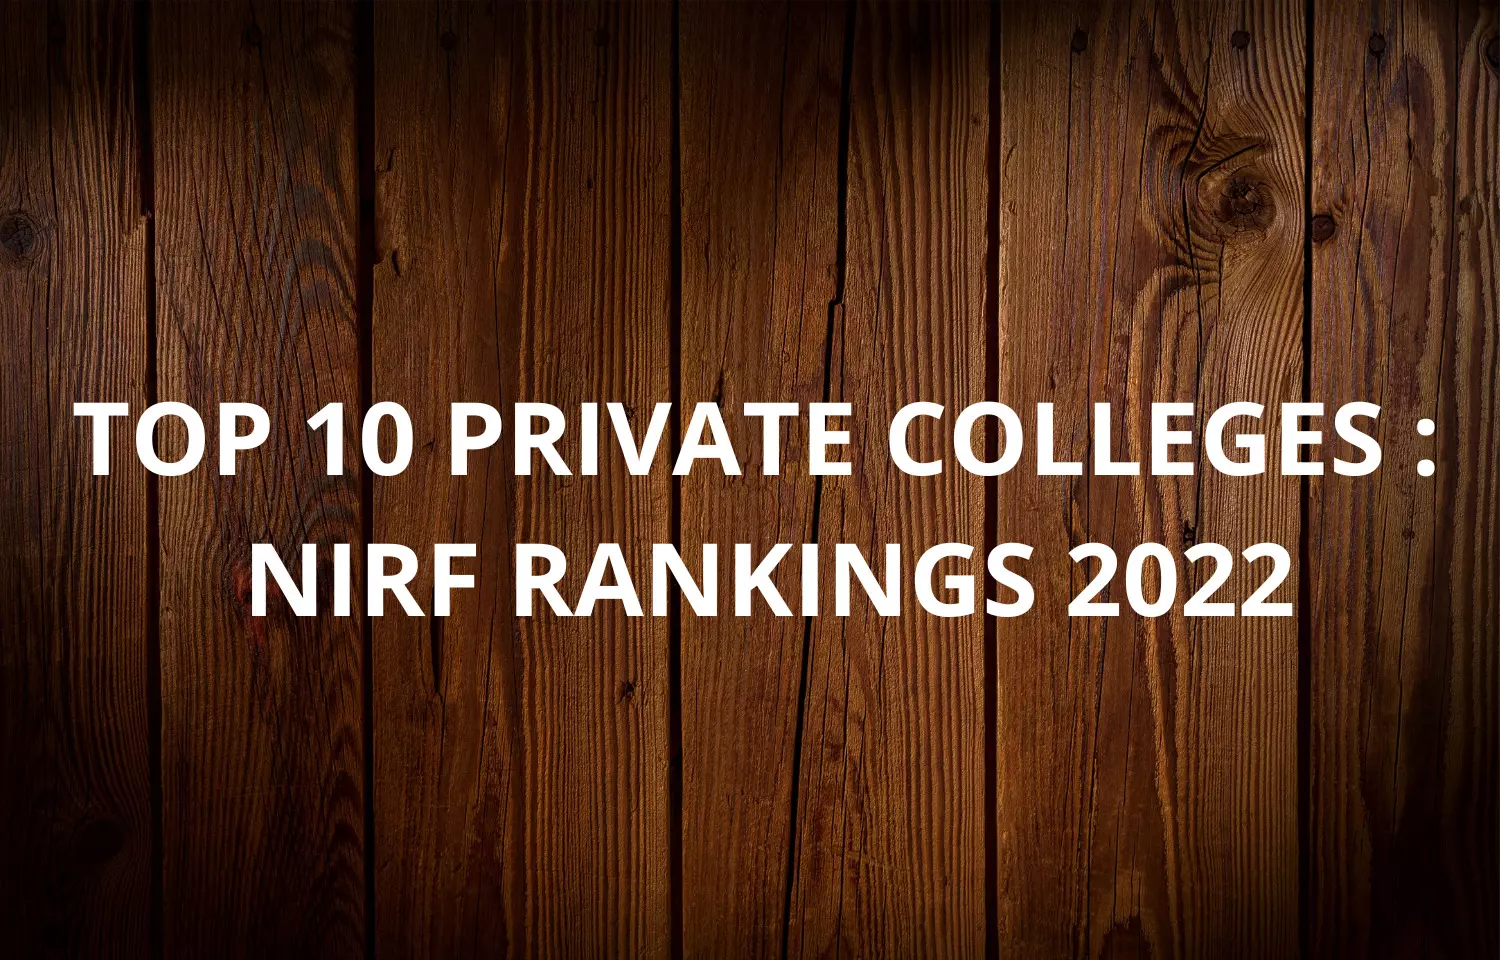 Planning for MBBS in 2022: Check out the top 10 Private medical colleges as per NIRF